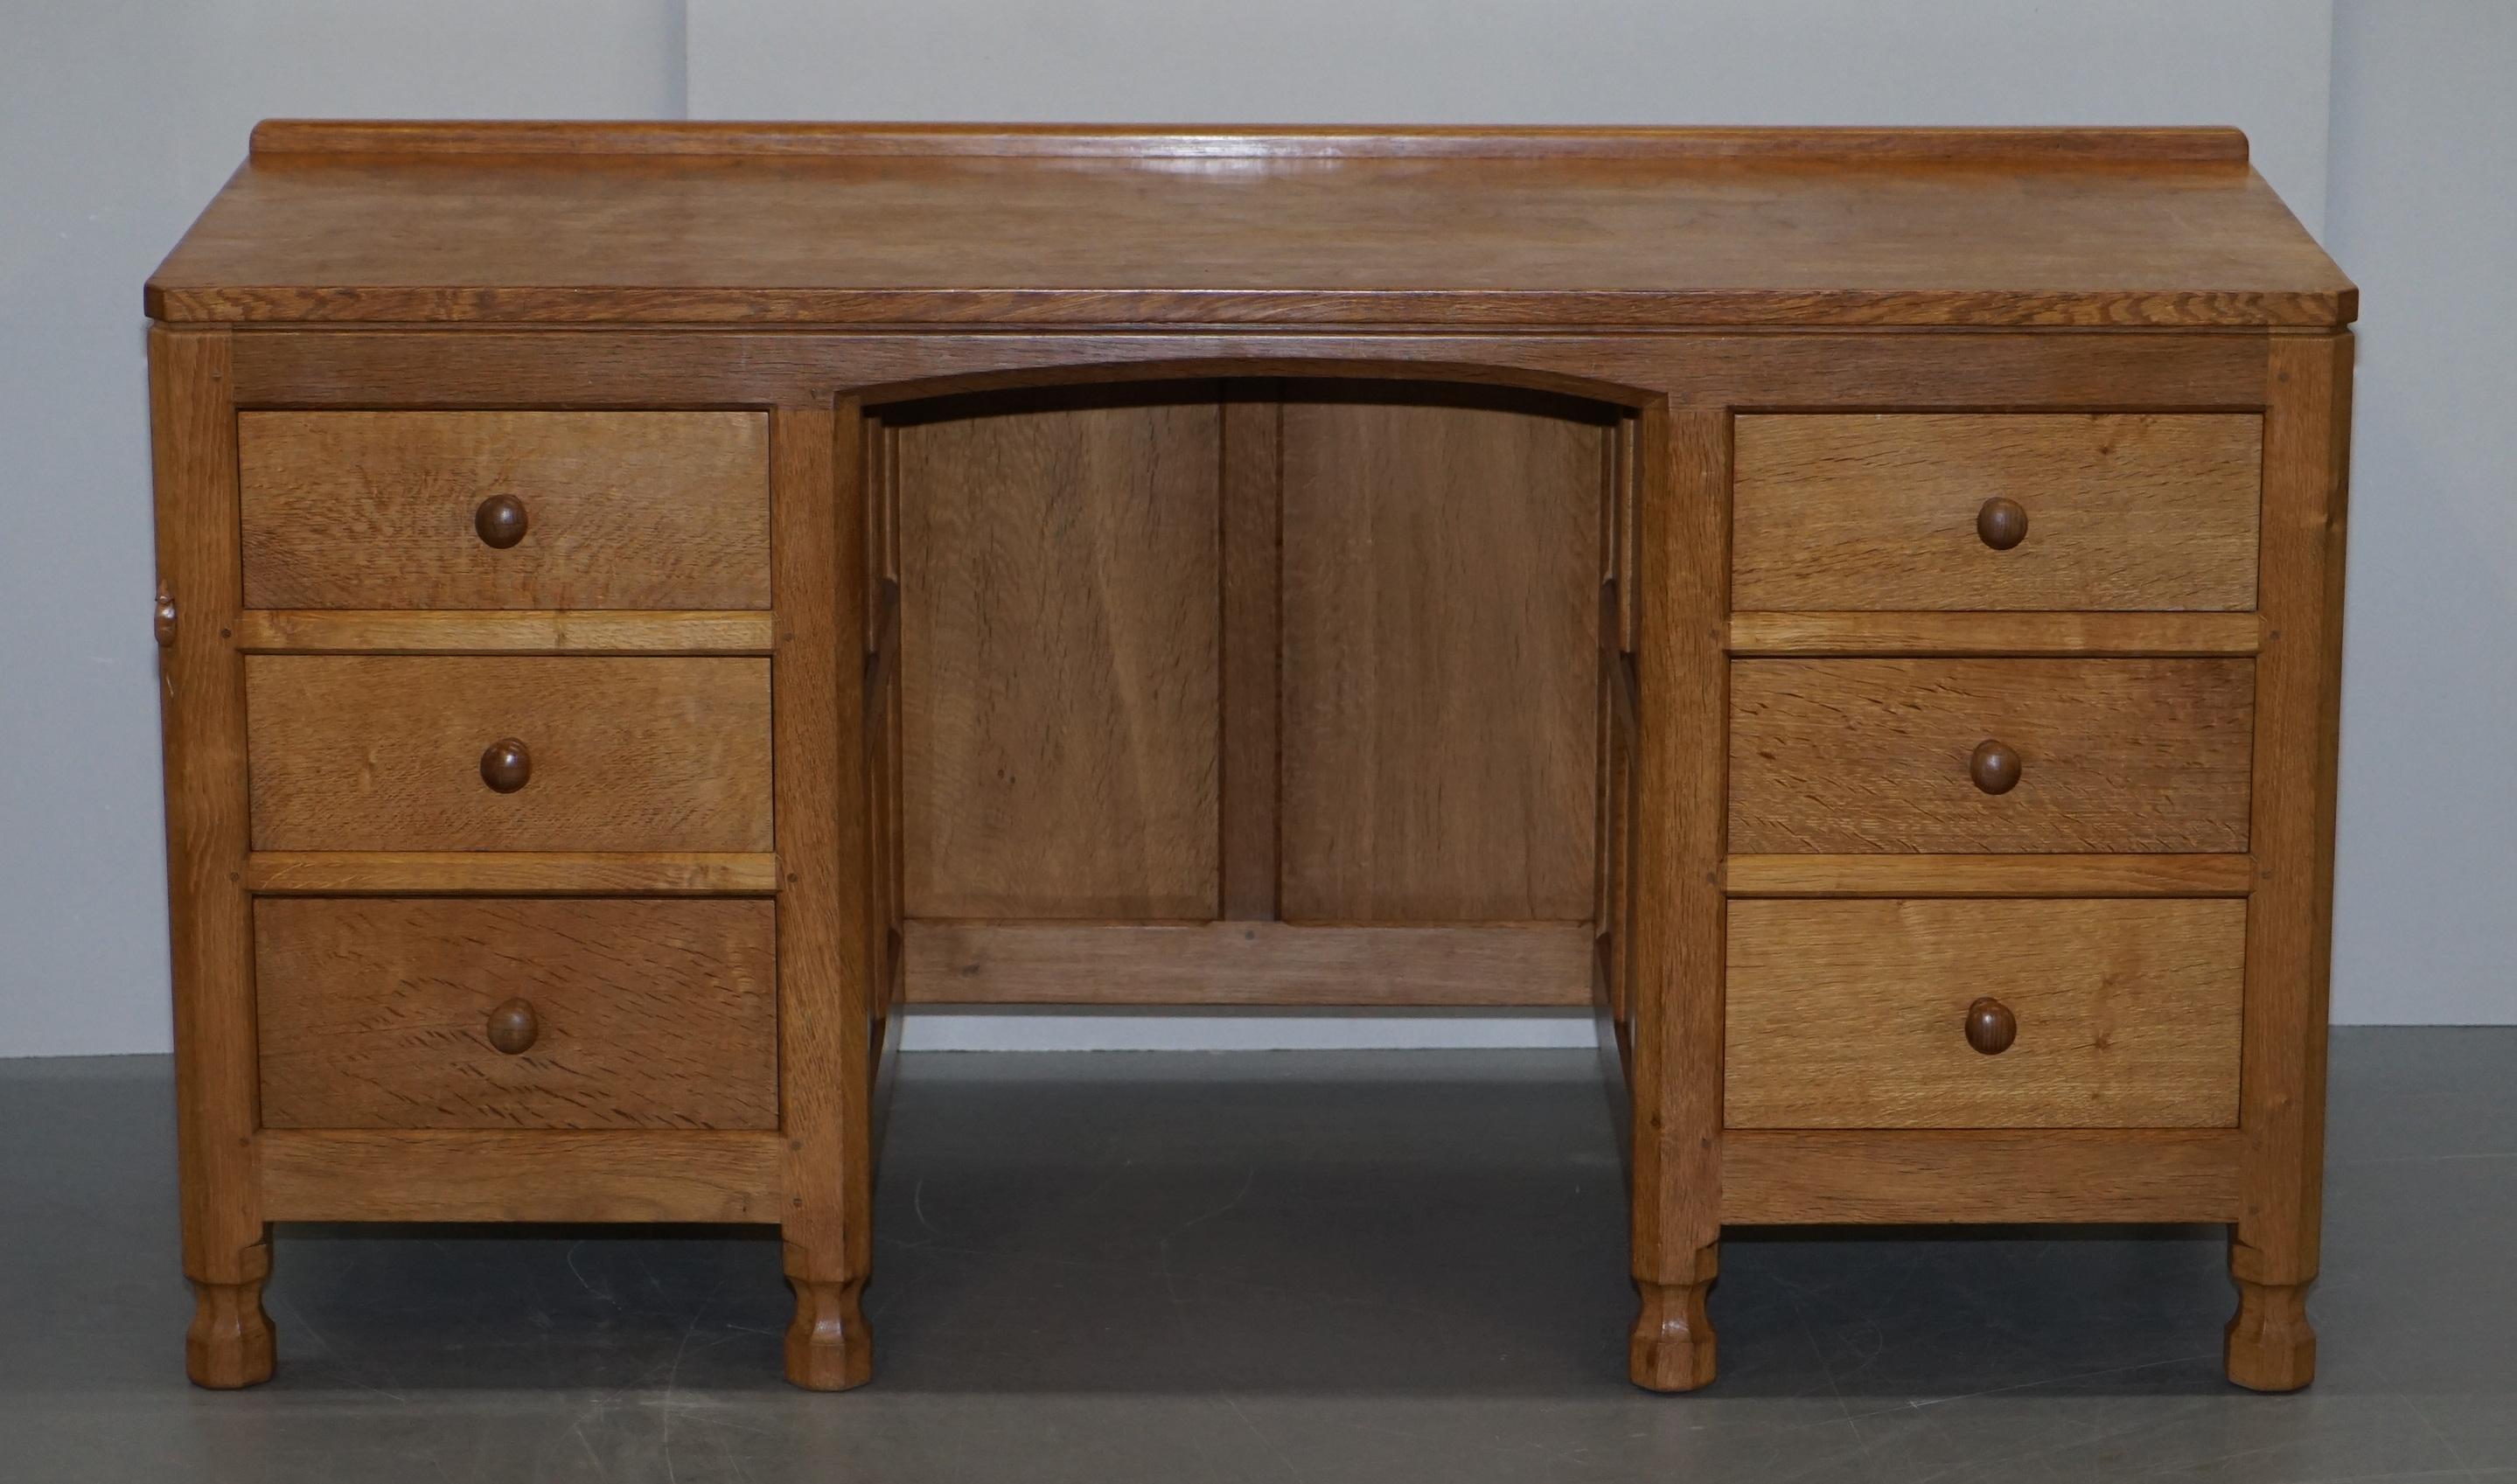 We are delighted to offer for sale this lovely vintage circa 1970s Robert Mouseman Thompson kneehole desk or dressing table

This piece is part of a collection of some very rare Mouseman pieces I have recently purchases, I have a Kneehole desk, a